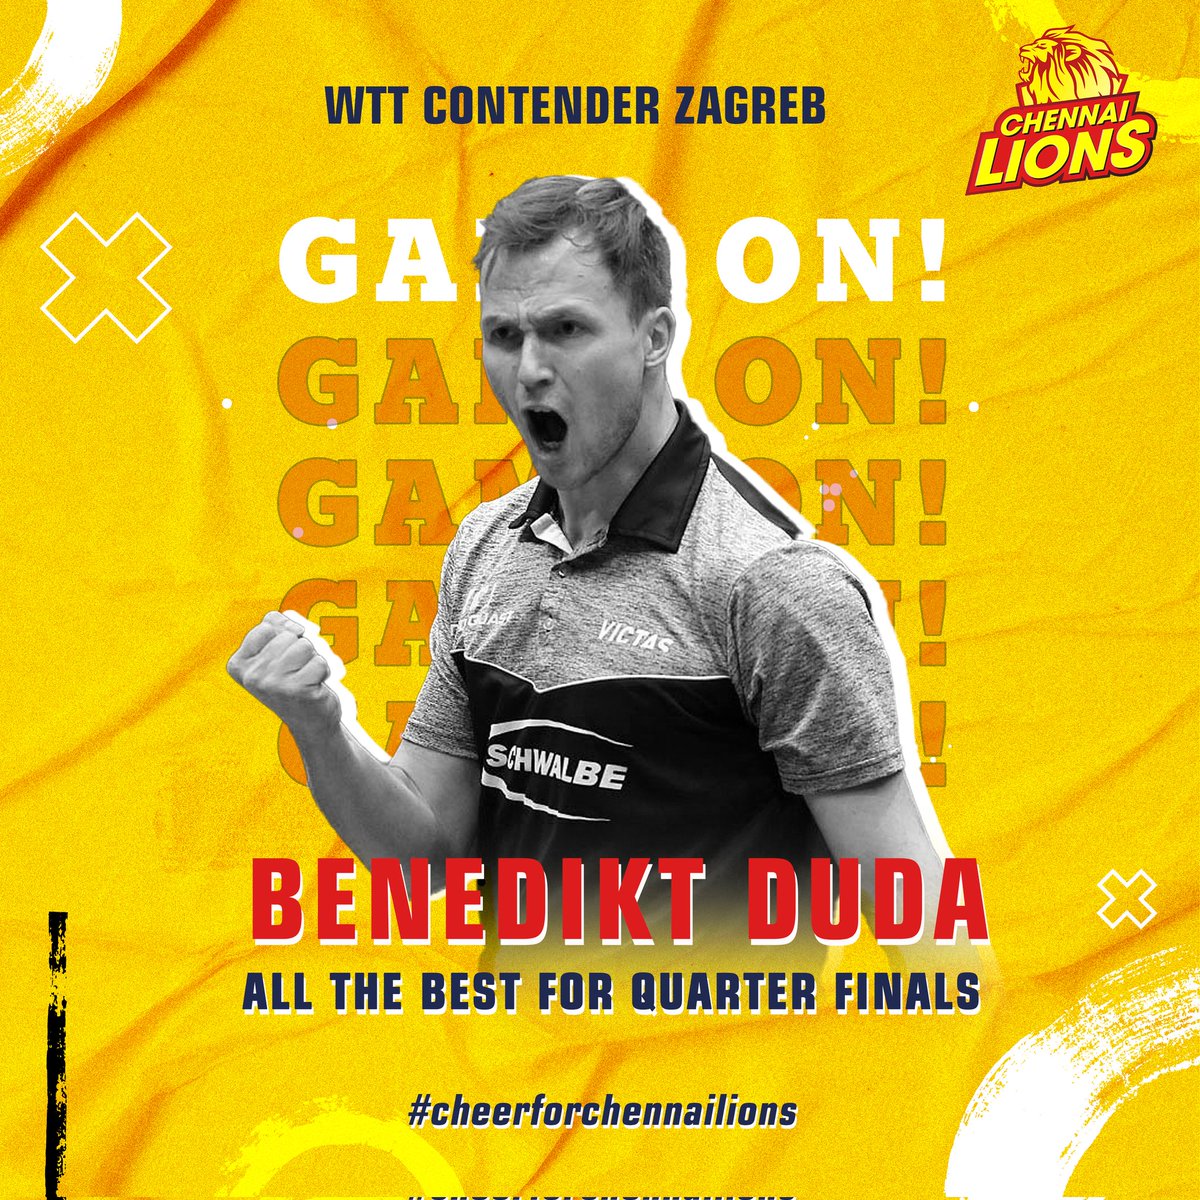 Our Chennai Lions Benedikt Duda gearing up to take on the formidable world number one ranked player, FAN Zhendong. 
All the best for the WTT CONTENDER ZAGREB Quarter Finals
#WTTZAGREB #benediktduda #FANZhendong #TTTournament #SportsForAll #thechennailions